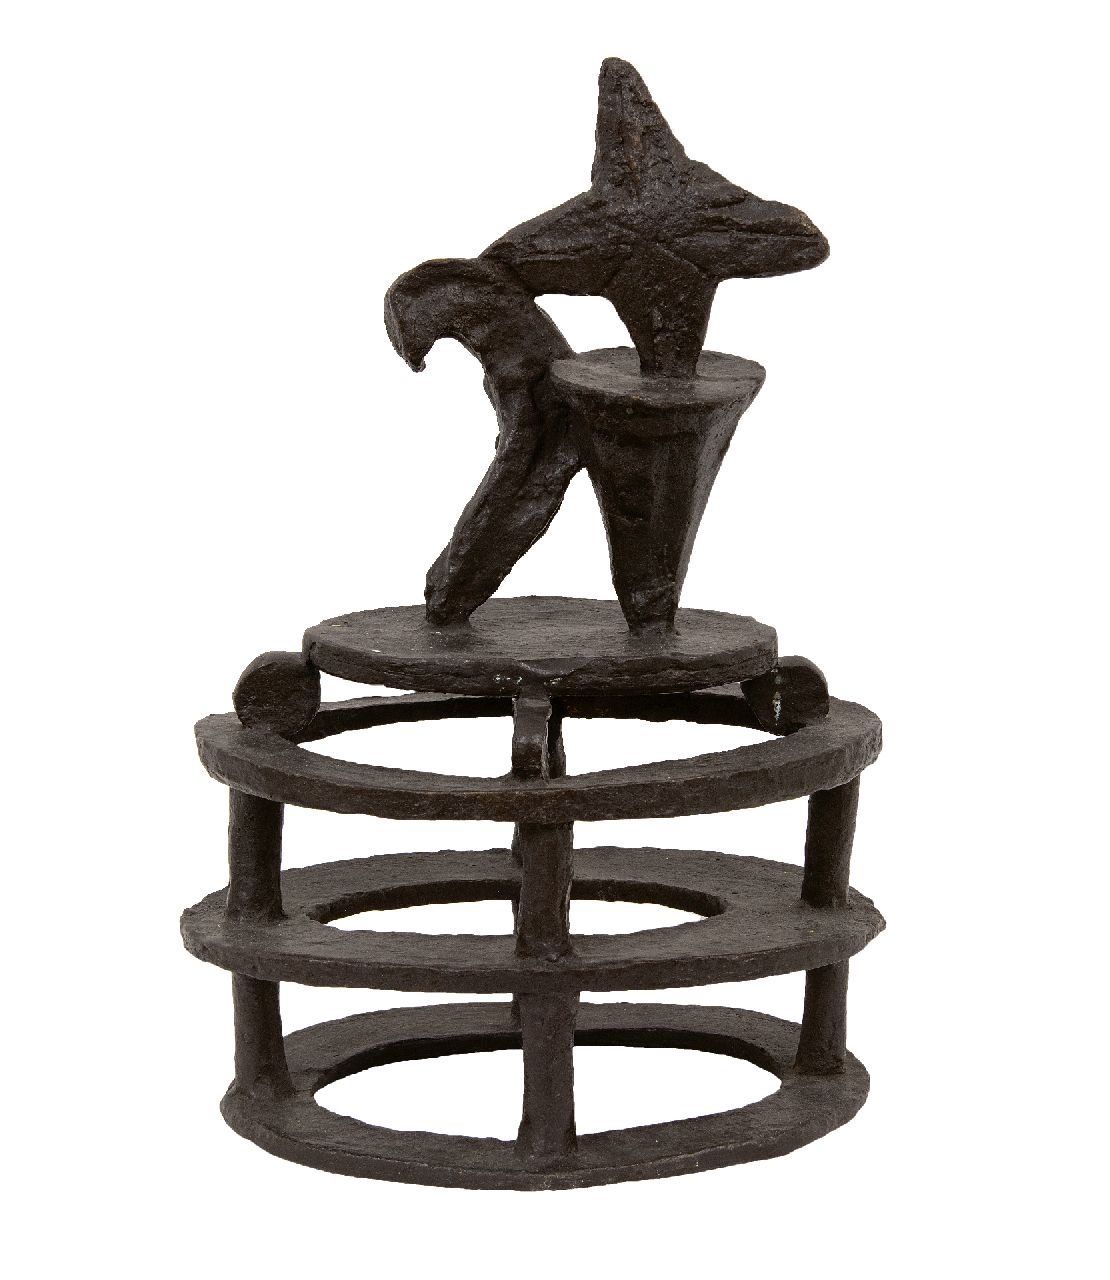 Warffemius P.  | Piet Warffemius | Sculptures and objects offered for sale | -, bronze 37.0 cm